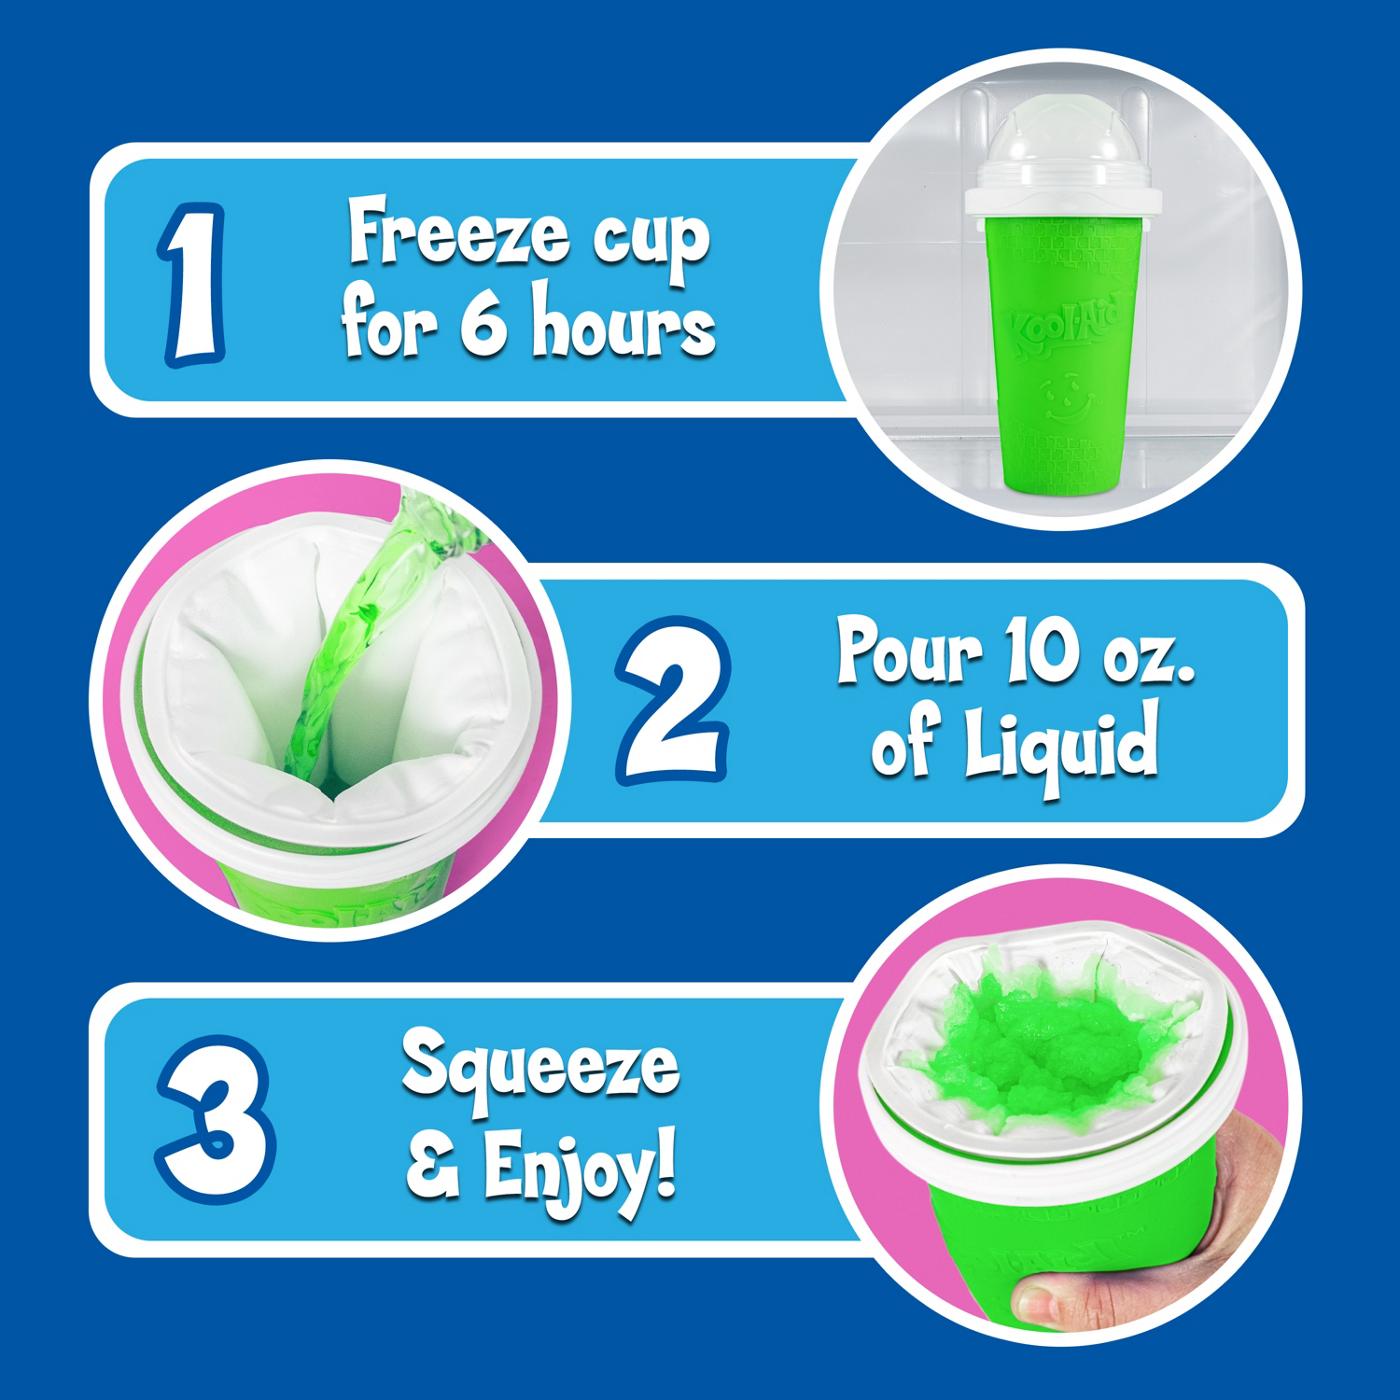 Kool-Aid Squeezy Slush Cup - Green; image 2 of 5